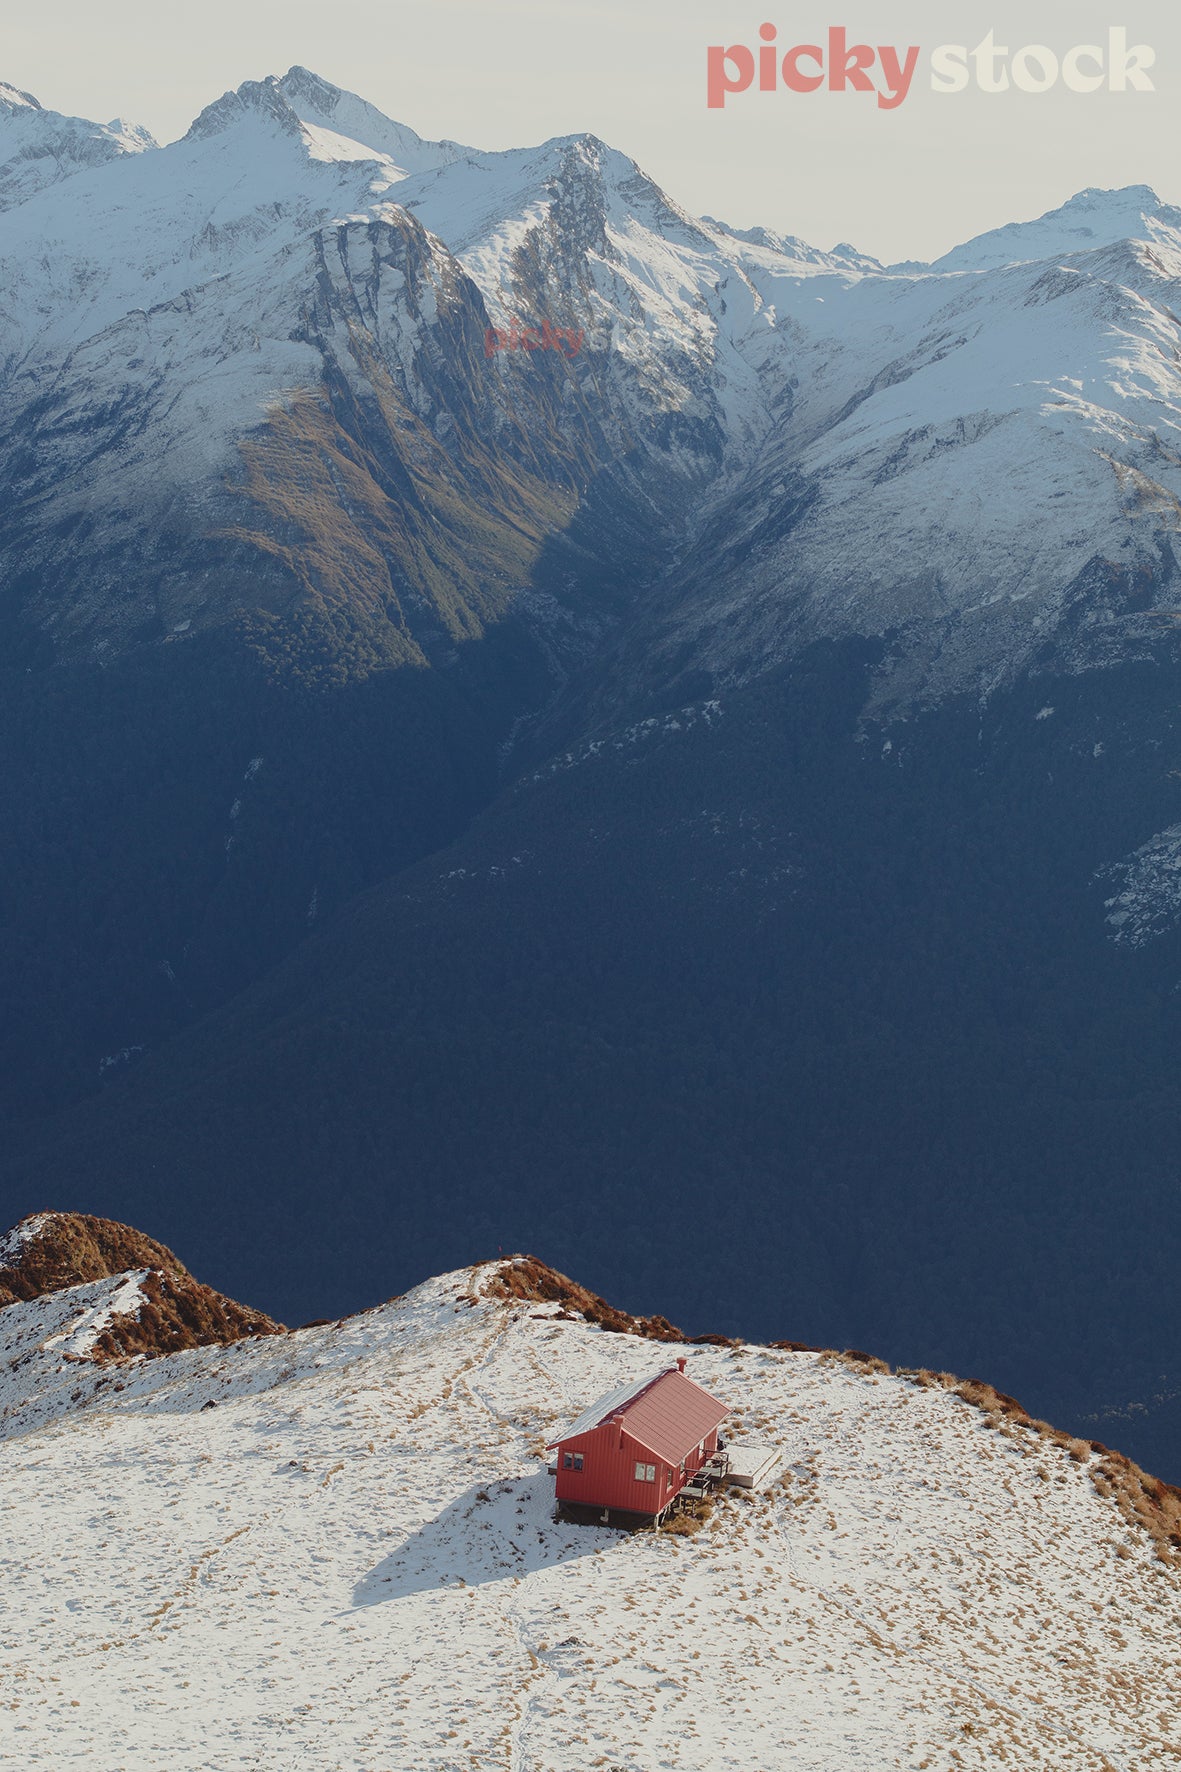 Portrait aerial image of Brewster Hut,  Mount Aspiring National Park. Hut is red, with a shadow to the left side. Low light, with dramatic snow capped mountains in the background. Hut on edge of a ridge or cliff